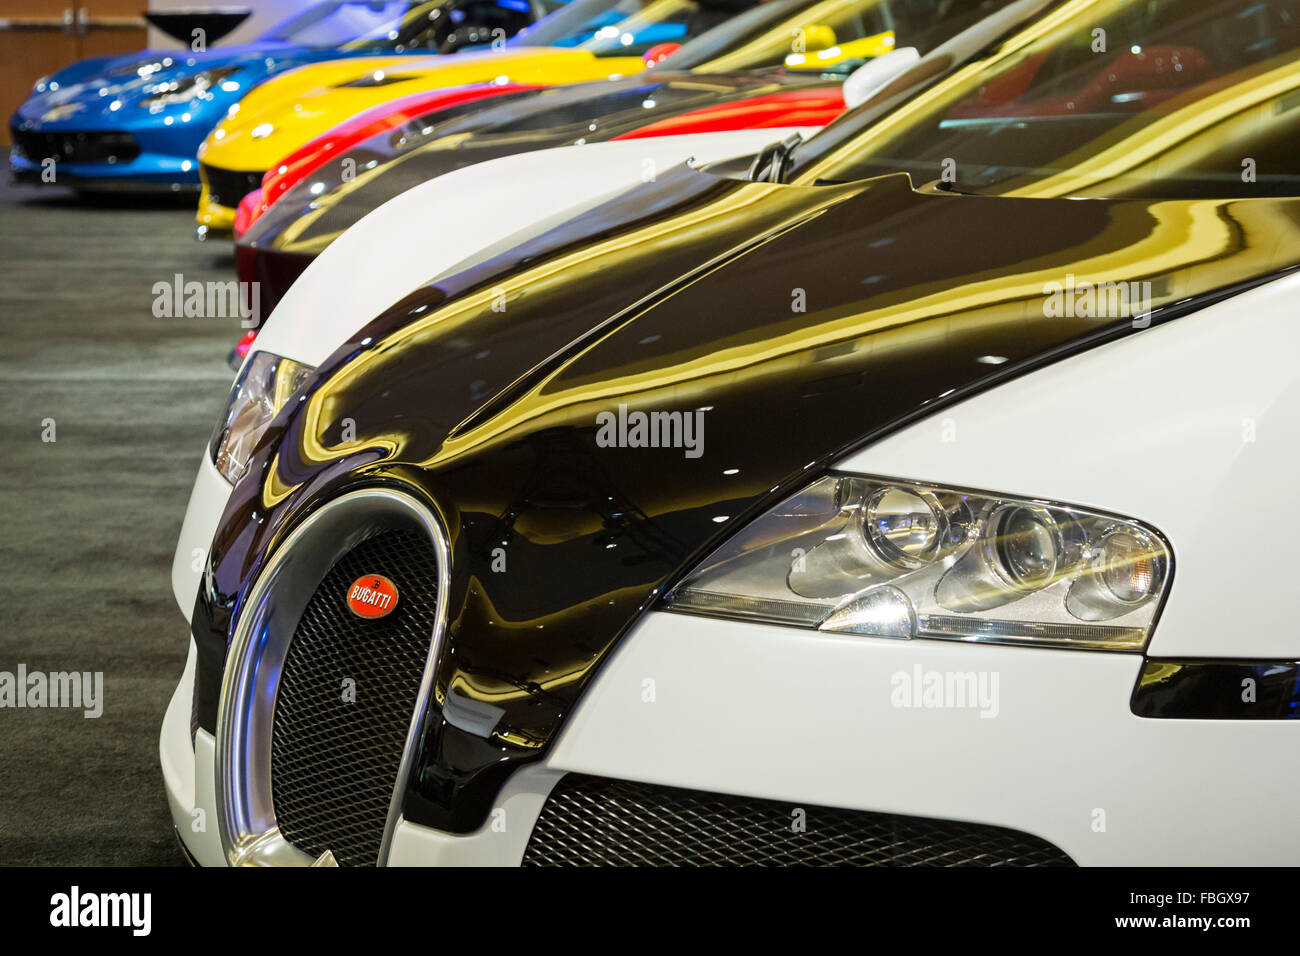 Detroit, Michigan - A 2006 Bugatti Veyron among a collection of ultra-luxury cars on display during the Detroit auto show. Stock Photo